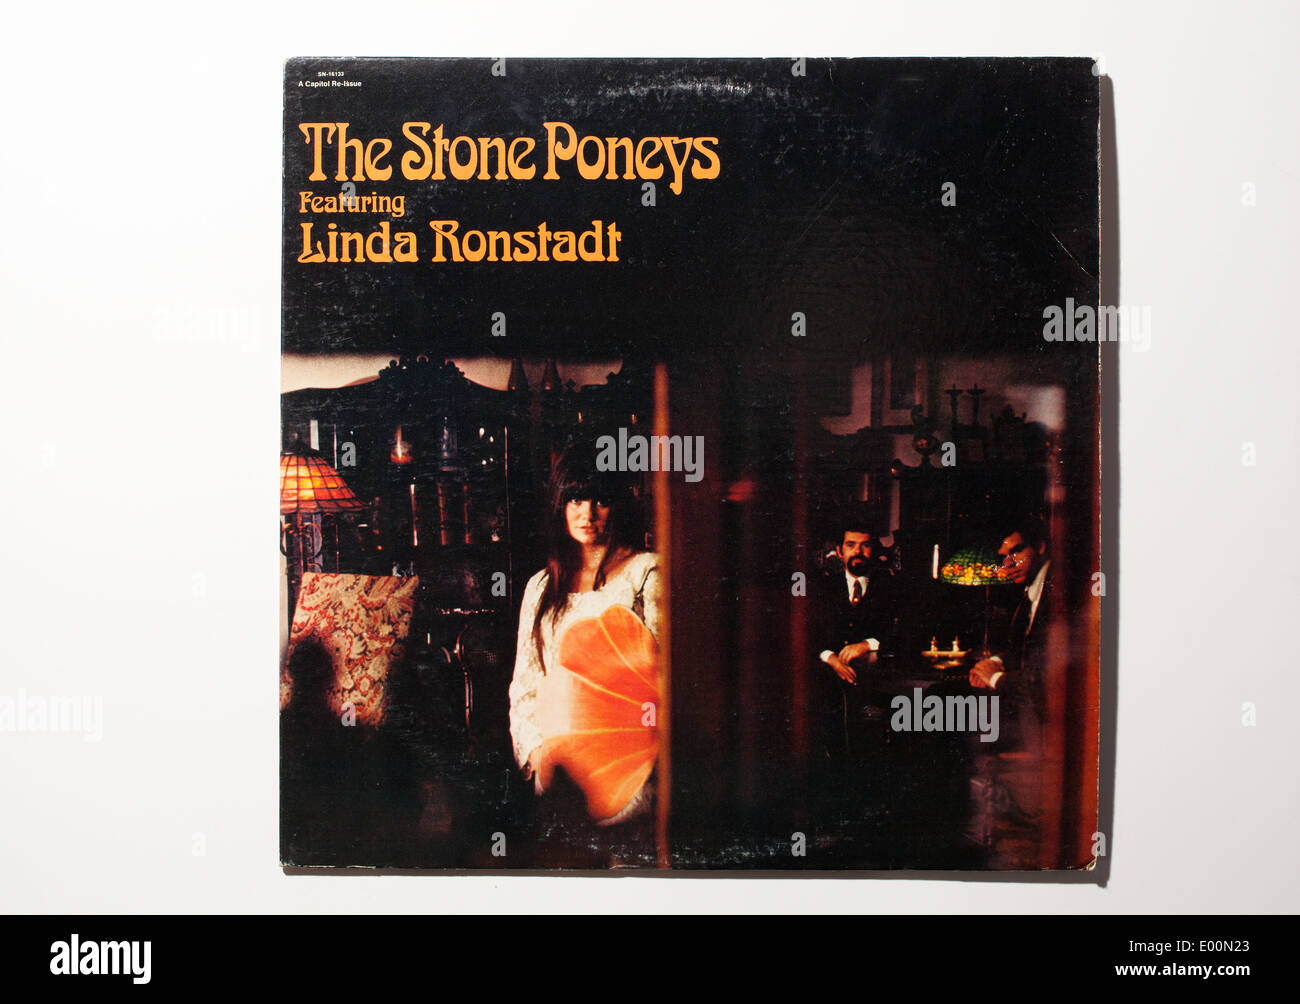 Vintage record album cover of The Stone Poneys with Linda Ronstadt on a Capitol Records re-issue. Stock Photo